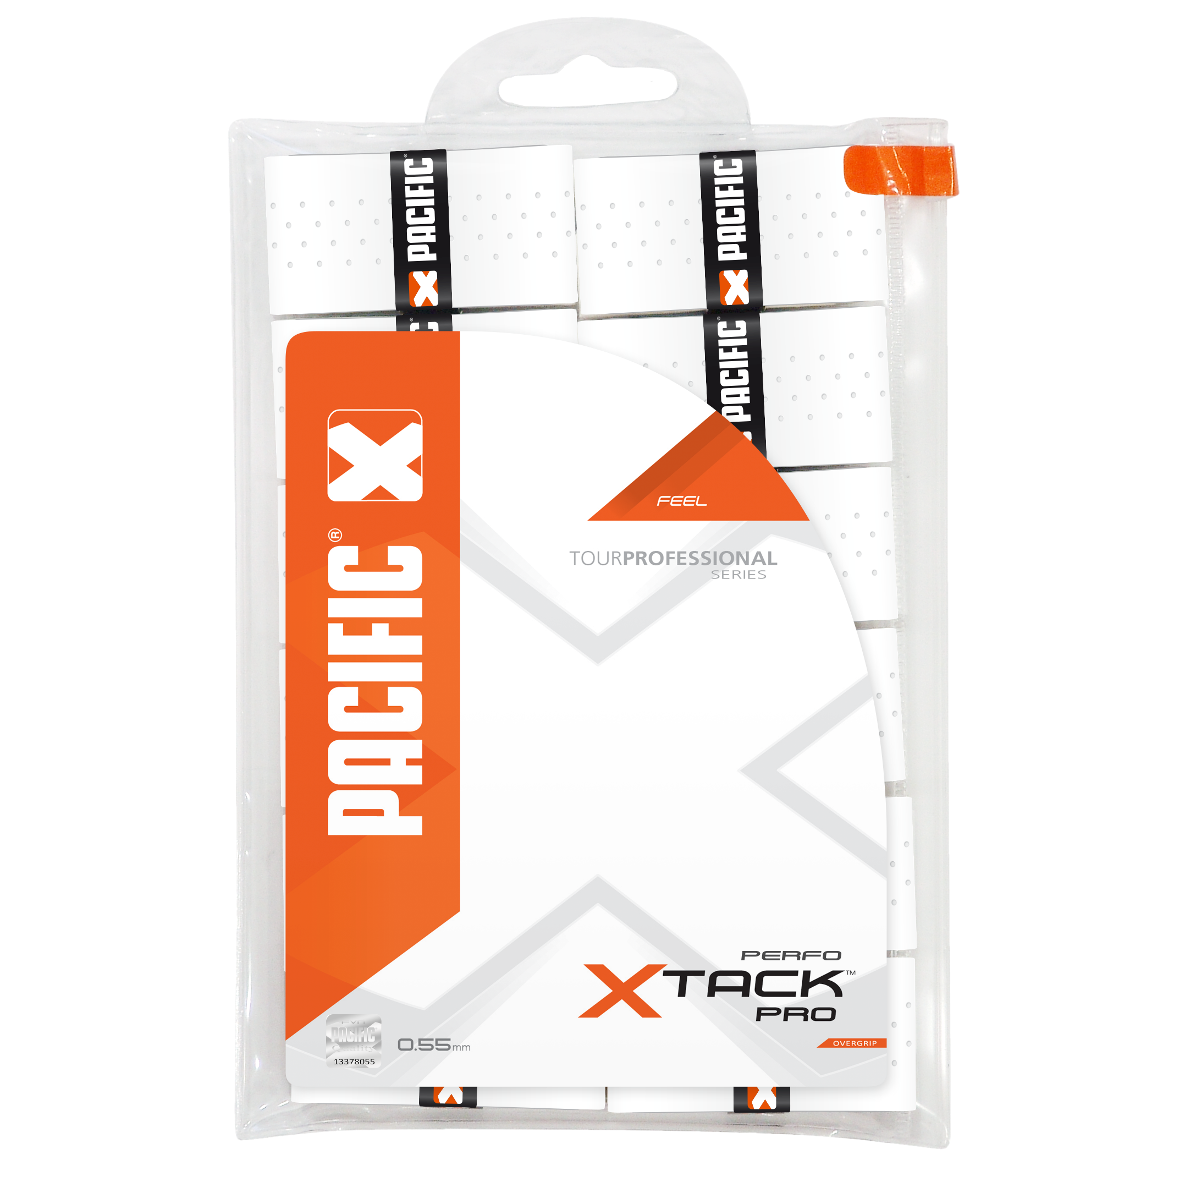 PACIFIC X Tack PRO Perfo – 12er Pack white